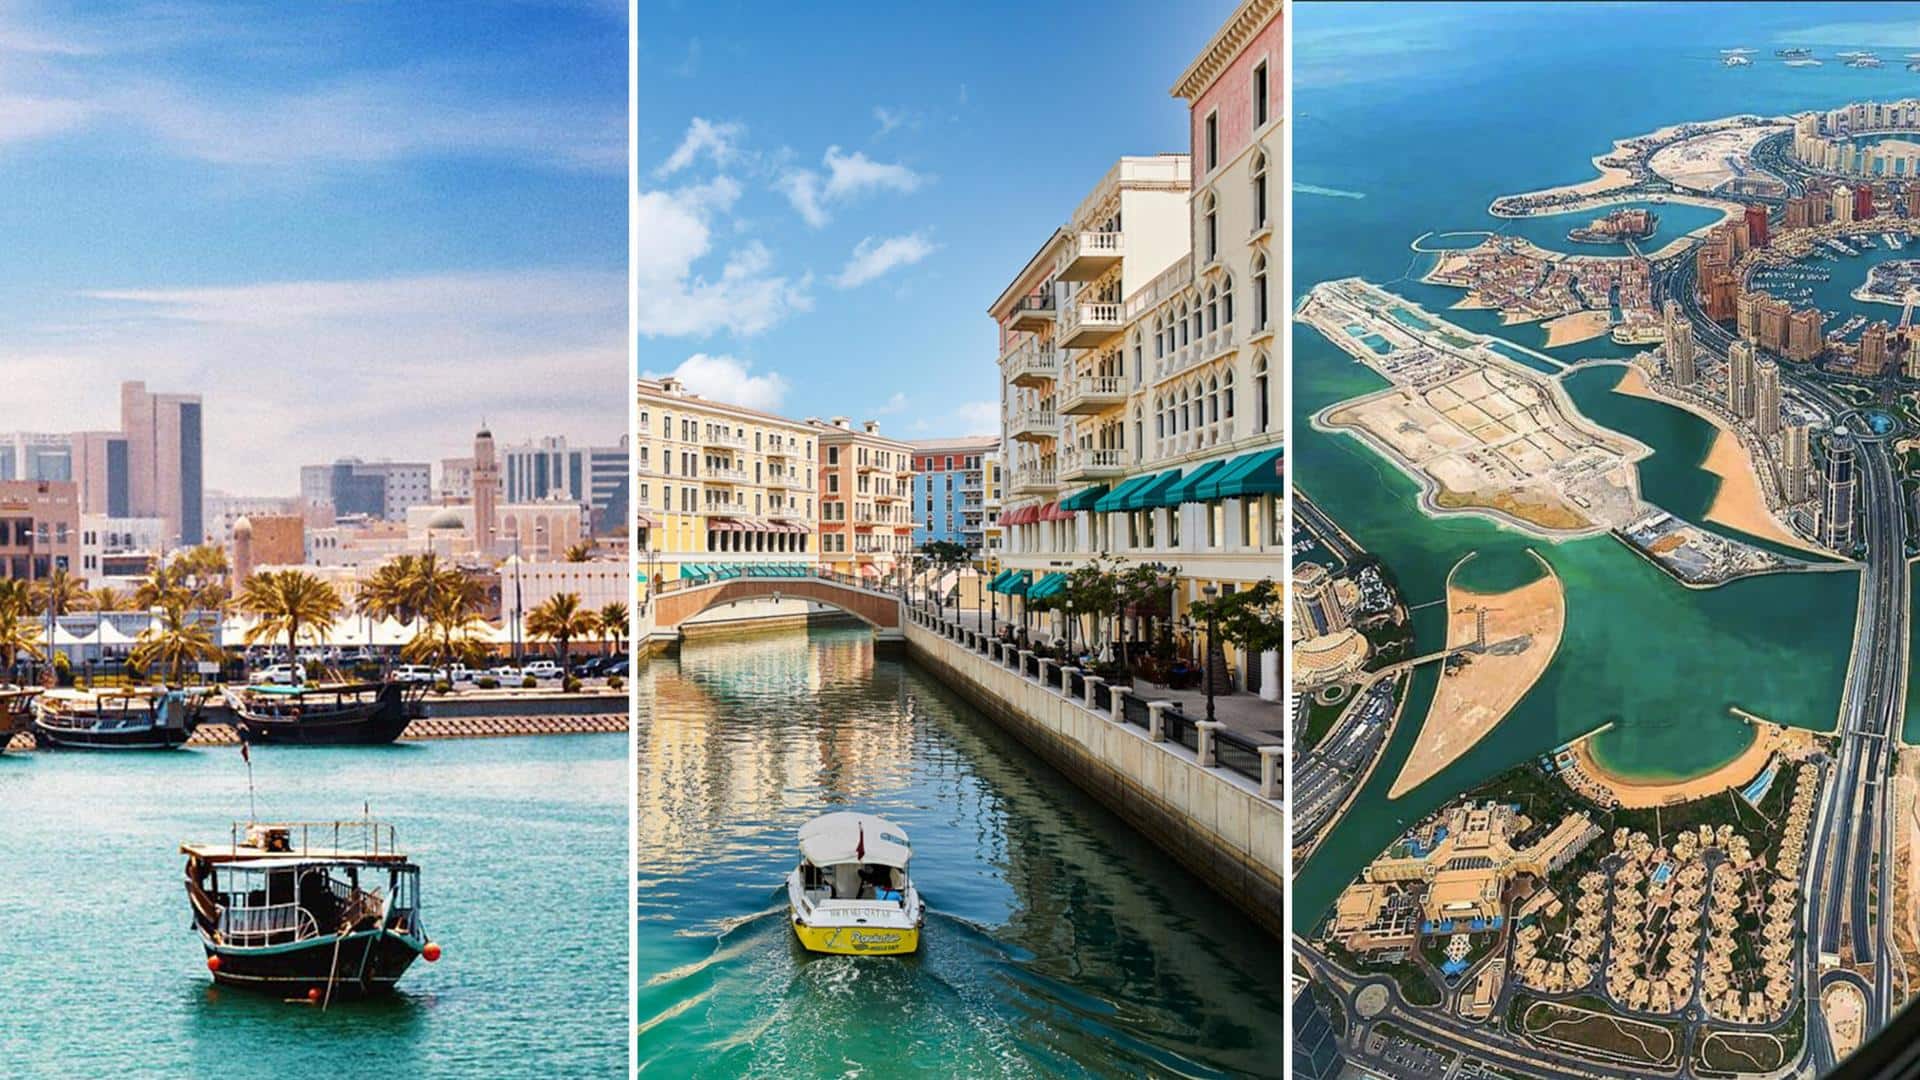 Attending FIFA World Cup Qatar 2022? Visit these places too